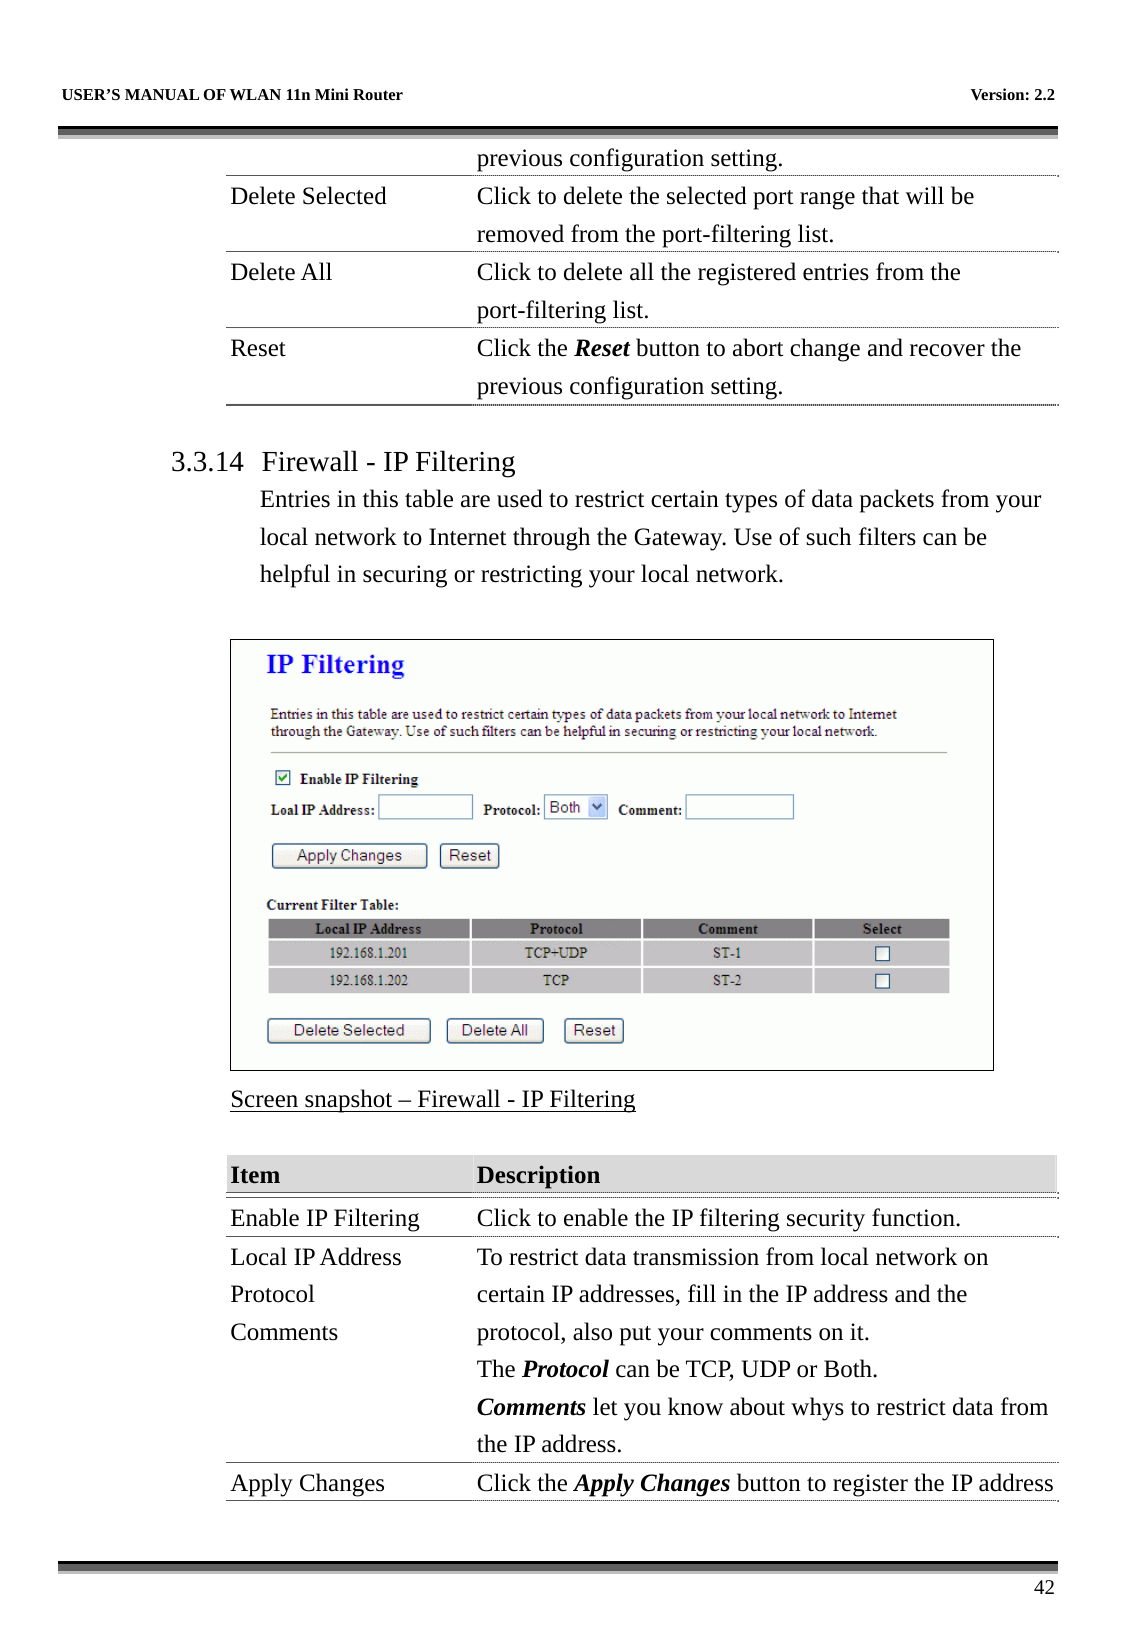   USER’S MANUAL OF WLAN 11n Mini Router    Version: 2.2      42 previous configuration setting. Delete Selected  Click to delete the selected port range that will be removed from the port-filtering list. Delete All  Click to delete all the registered entries from the port-filtering list.   Reset Click the Reset button to abort change and recover the previous configuration setting.  3.3.14  Firewall - IP Filtering Entries in this table are used to restrict certain types of data packets from your local network to Internet through the Gateway. Use of such filters can be helpful in securing or restricting your local network.   Screen snapshot – Firewall - IP Filtering  Item  Description   Enable IP Filtering  Click to enable the IP filtering security function. Local IP Address Protocol Comments To restrict data transmission from local network on certain IP addresses, fill in the IP address and the protocol, also put your comments on it. The Protocol can be TCP, UDP or Both. Comments let you know about whys to restrict data from the IP address. Apply Changes  Click the Apply Changes button to register the IP address 